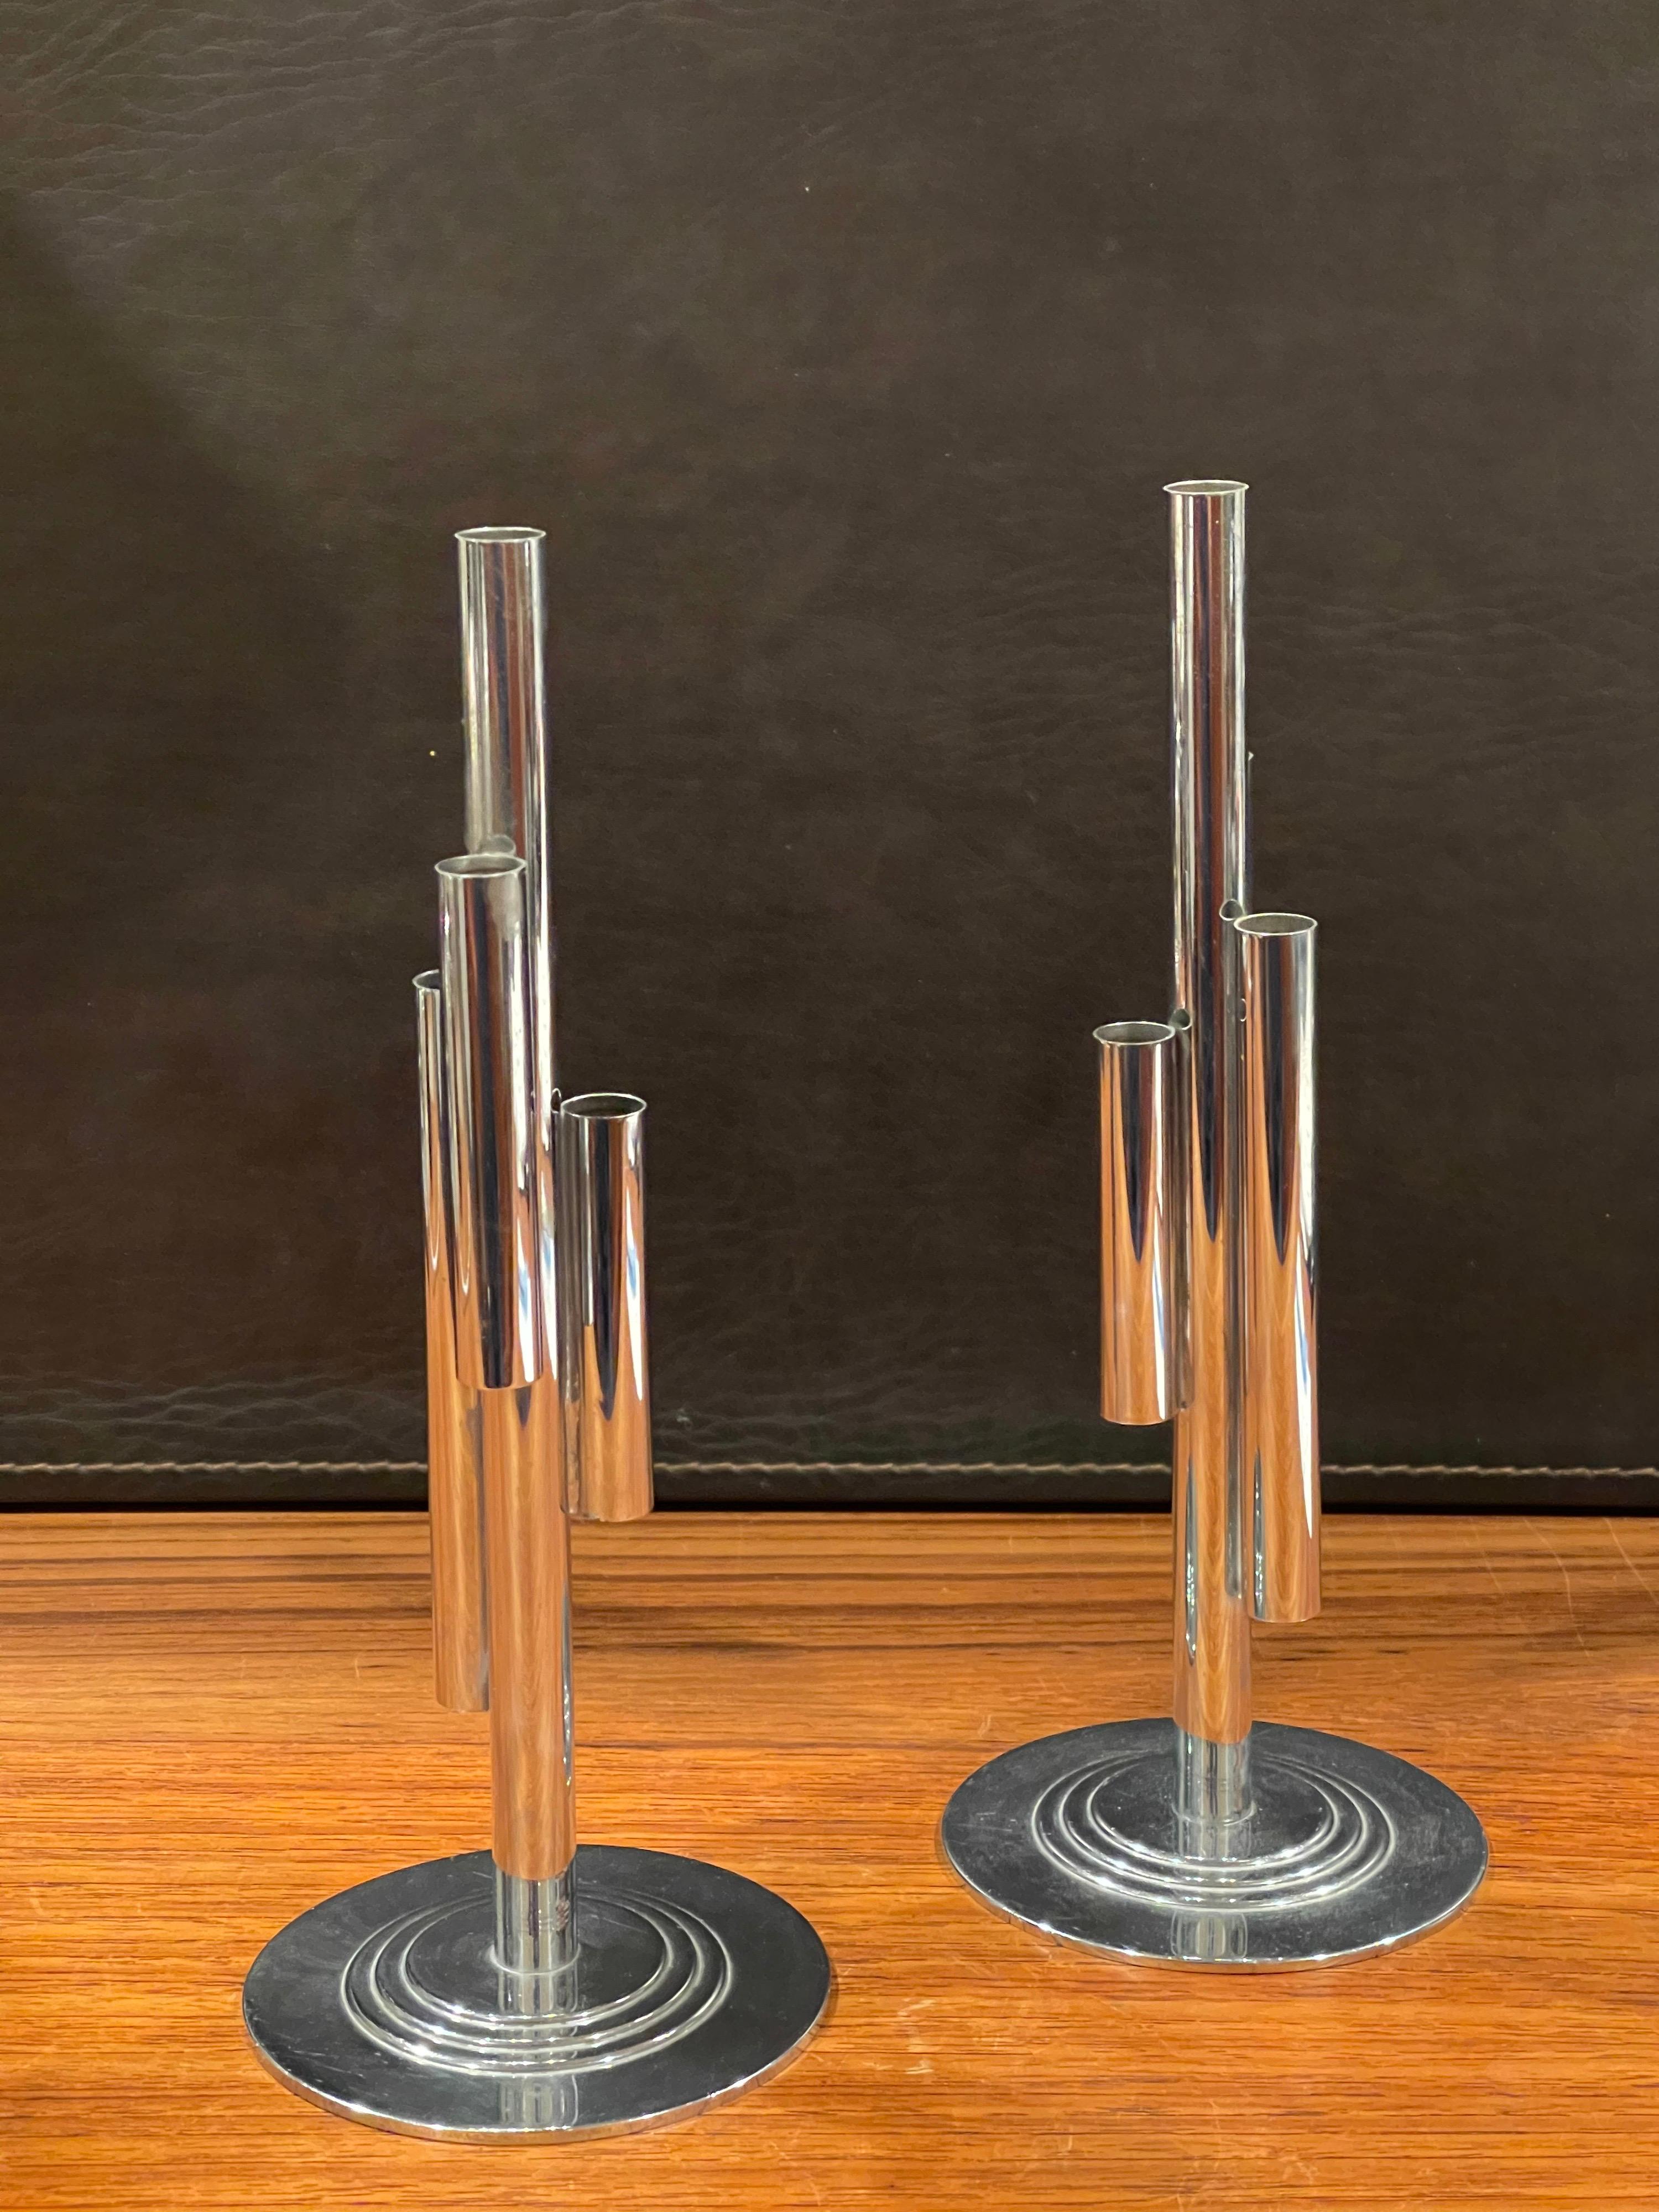 Pair of Art Deco Tubular Chrome Bud Vases by Ruth & William Gerth for Chase Co In Good Condition For Sale In San Diego, CA